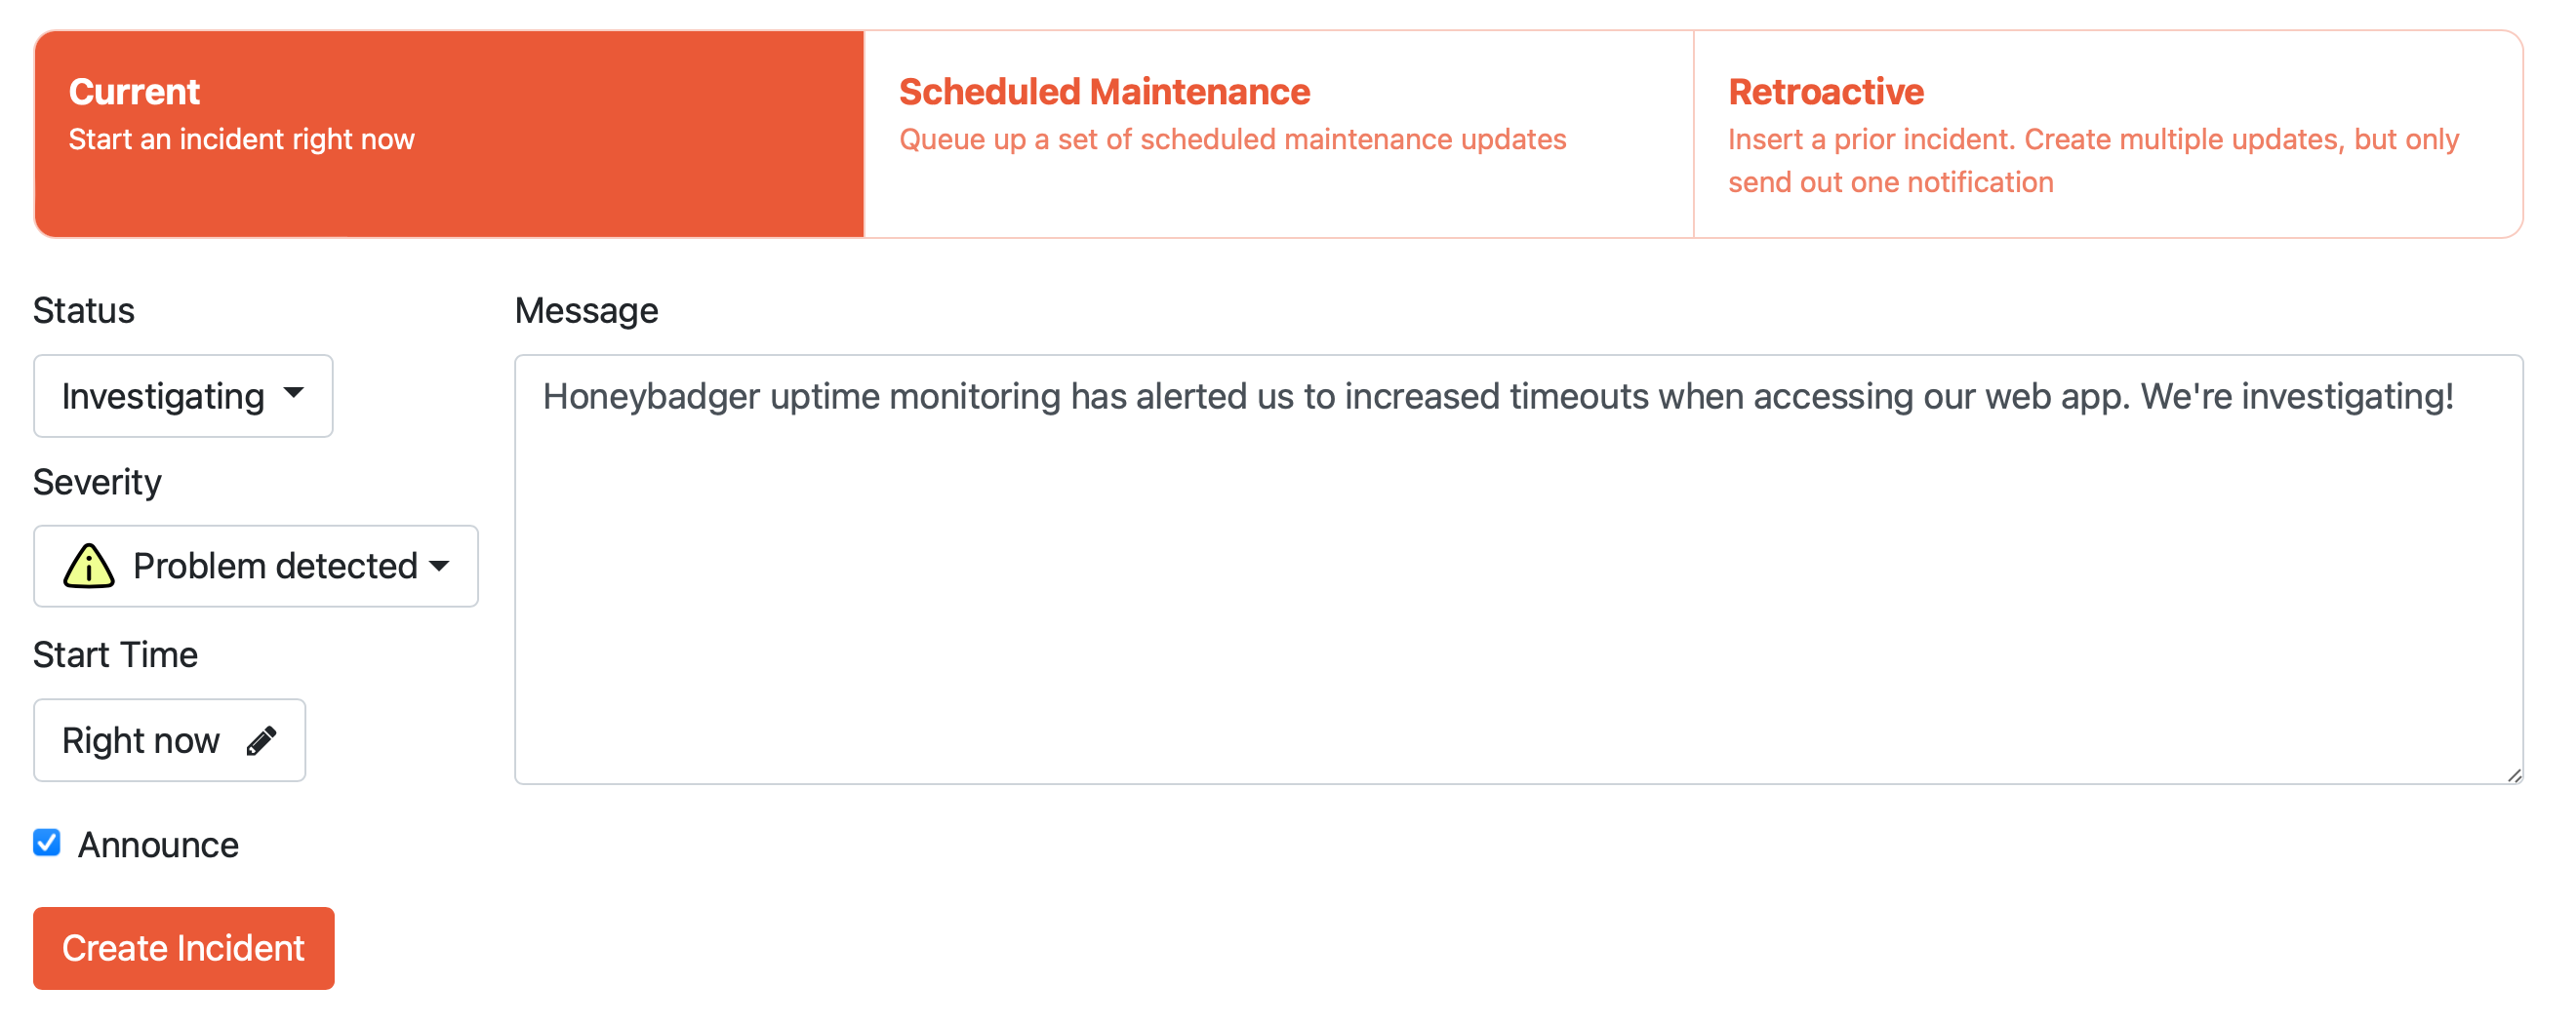 Honeybadger uptime monitoring has alerted us to increased timeouts when accessing our web app. We're investigating!